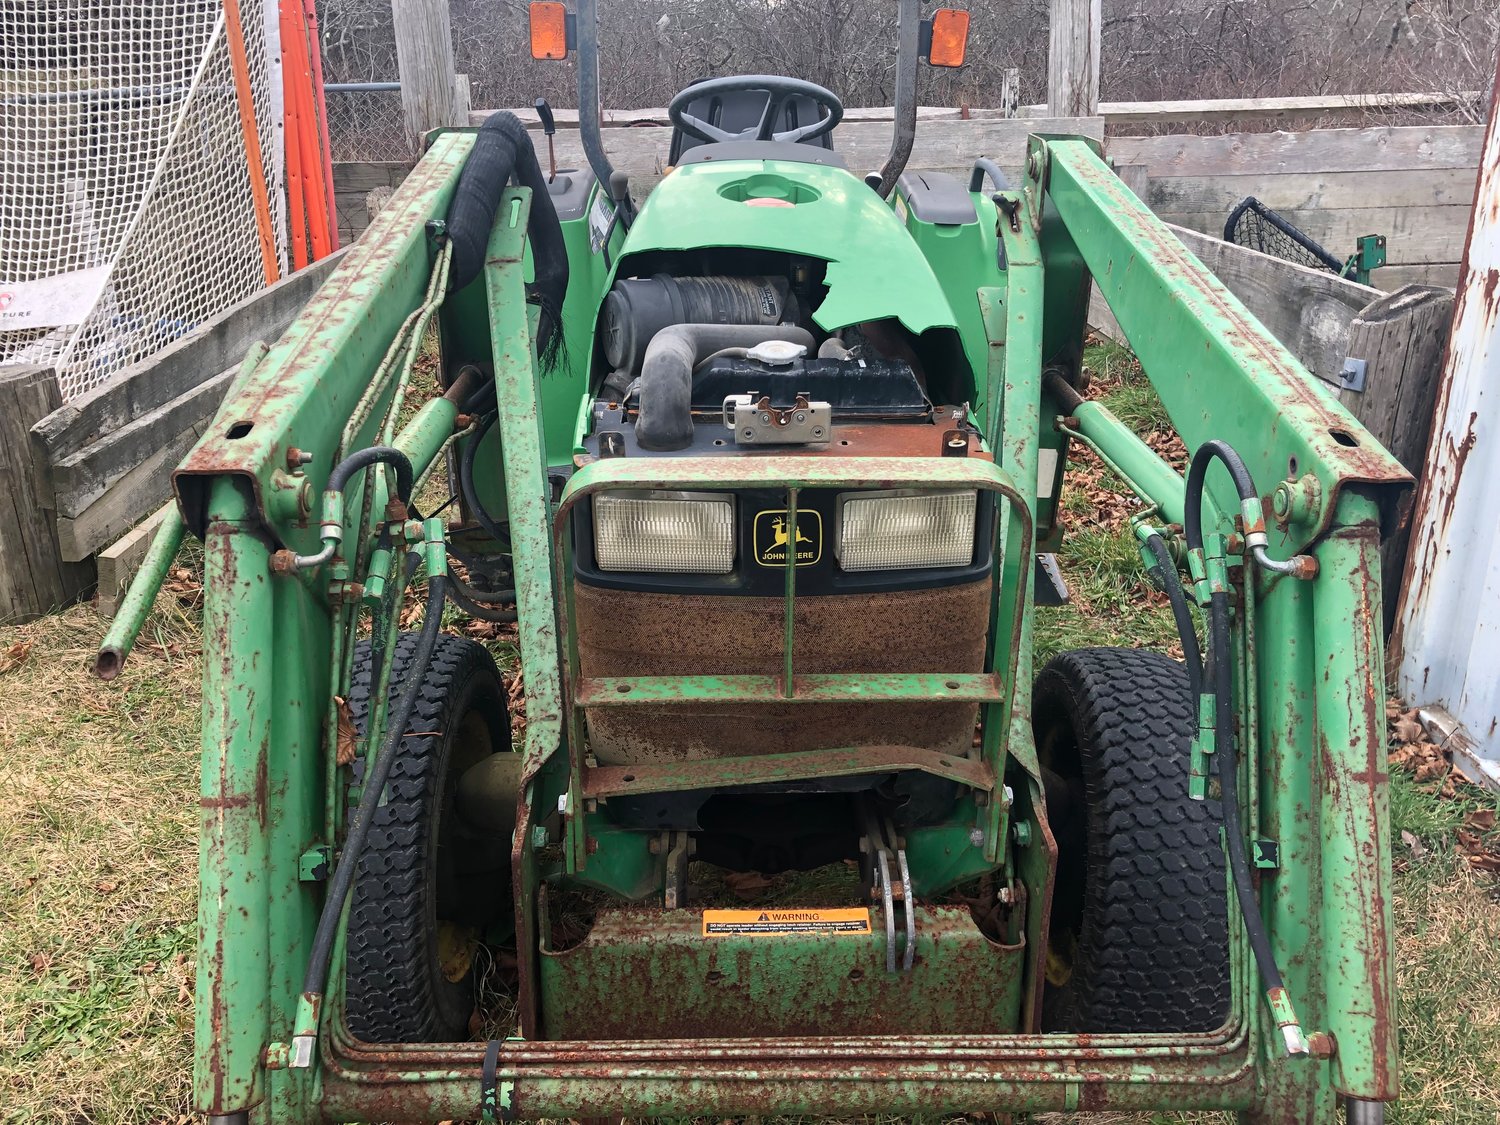 The plastic cowling over the engine on this John Deere tractor was heavily damaged.